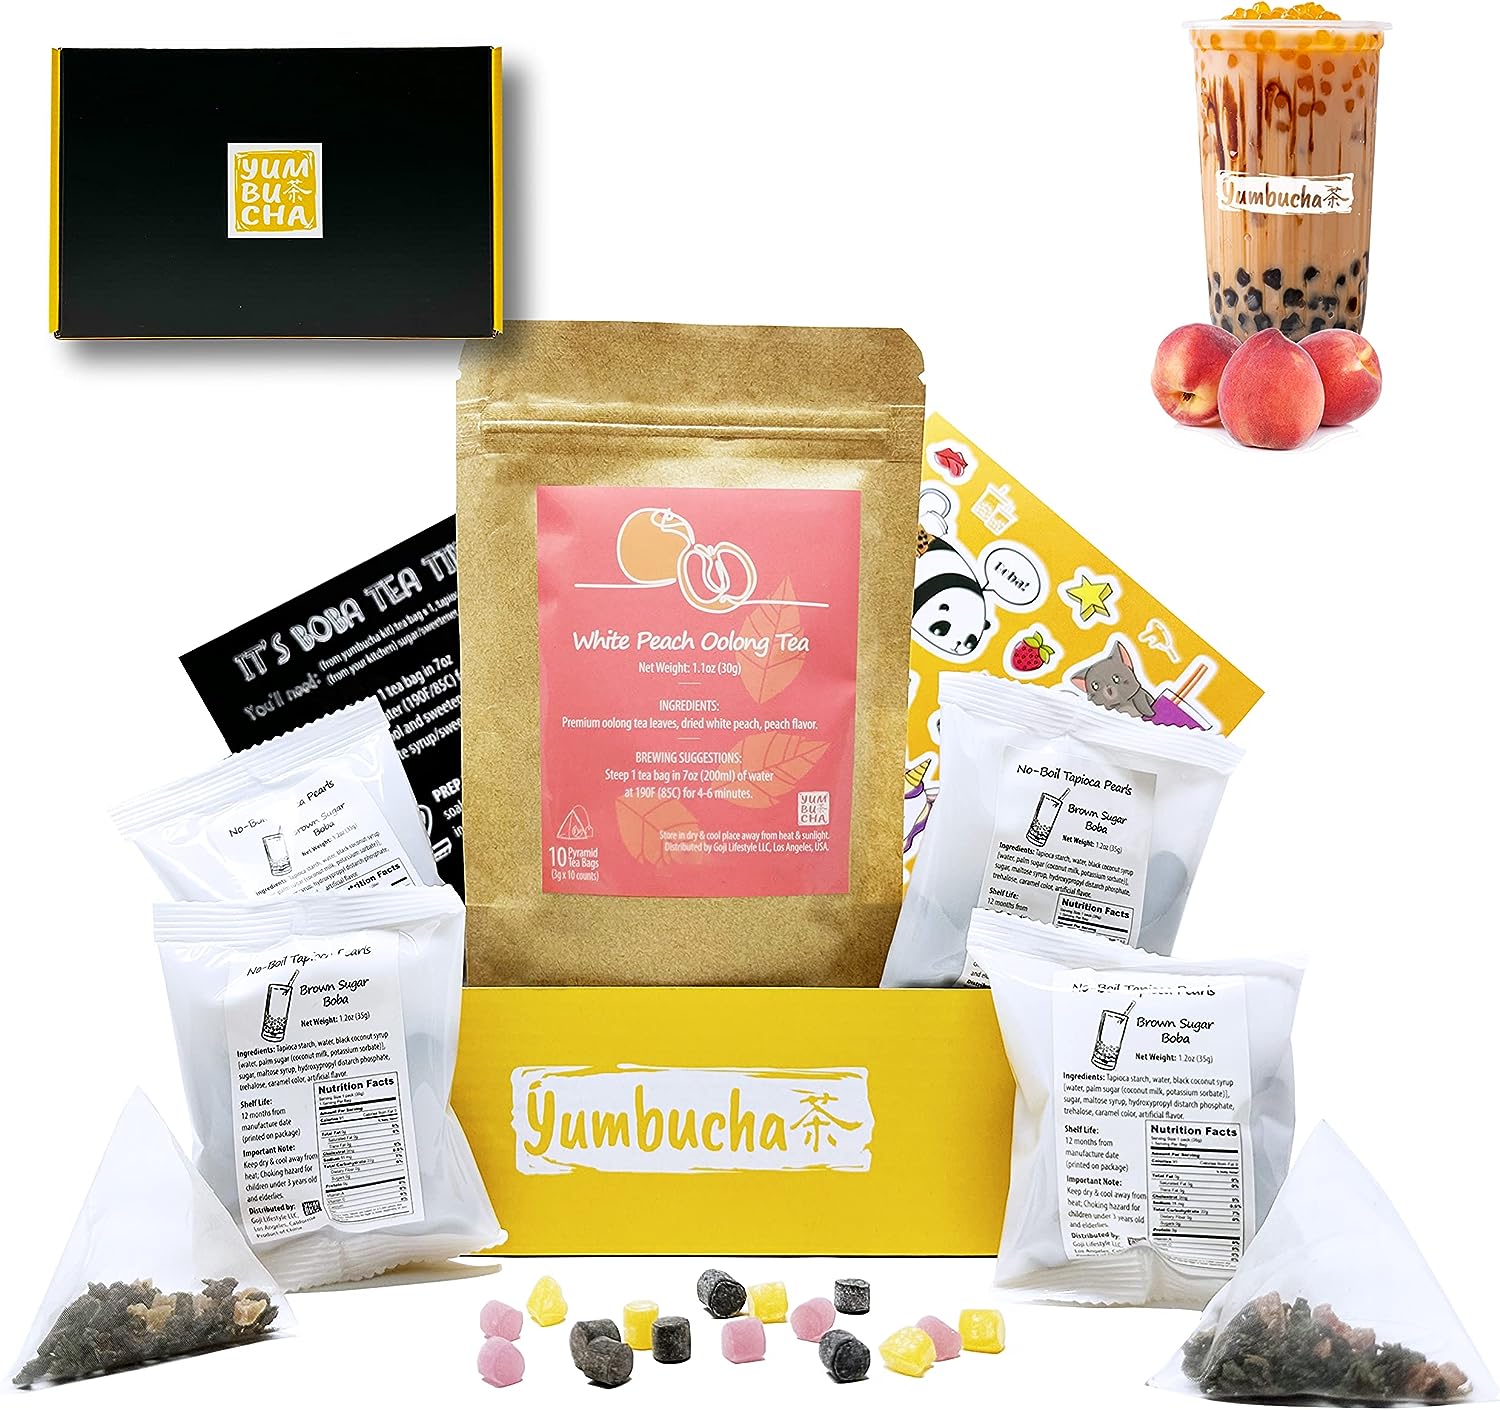 YUMBUCHA Boba Kit Set - DIY Boba Tea Making Kit with White Peach Oolong  Tapioca Pearls - Create 10 Delightful Drinks - Exquisite Loose Leaf Teabags Included - Boba Tea Gift Set for Tea Lovers